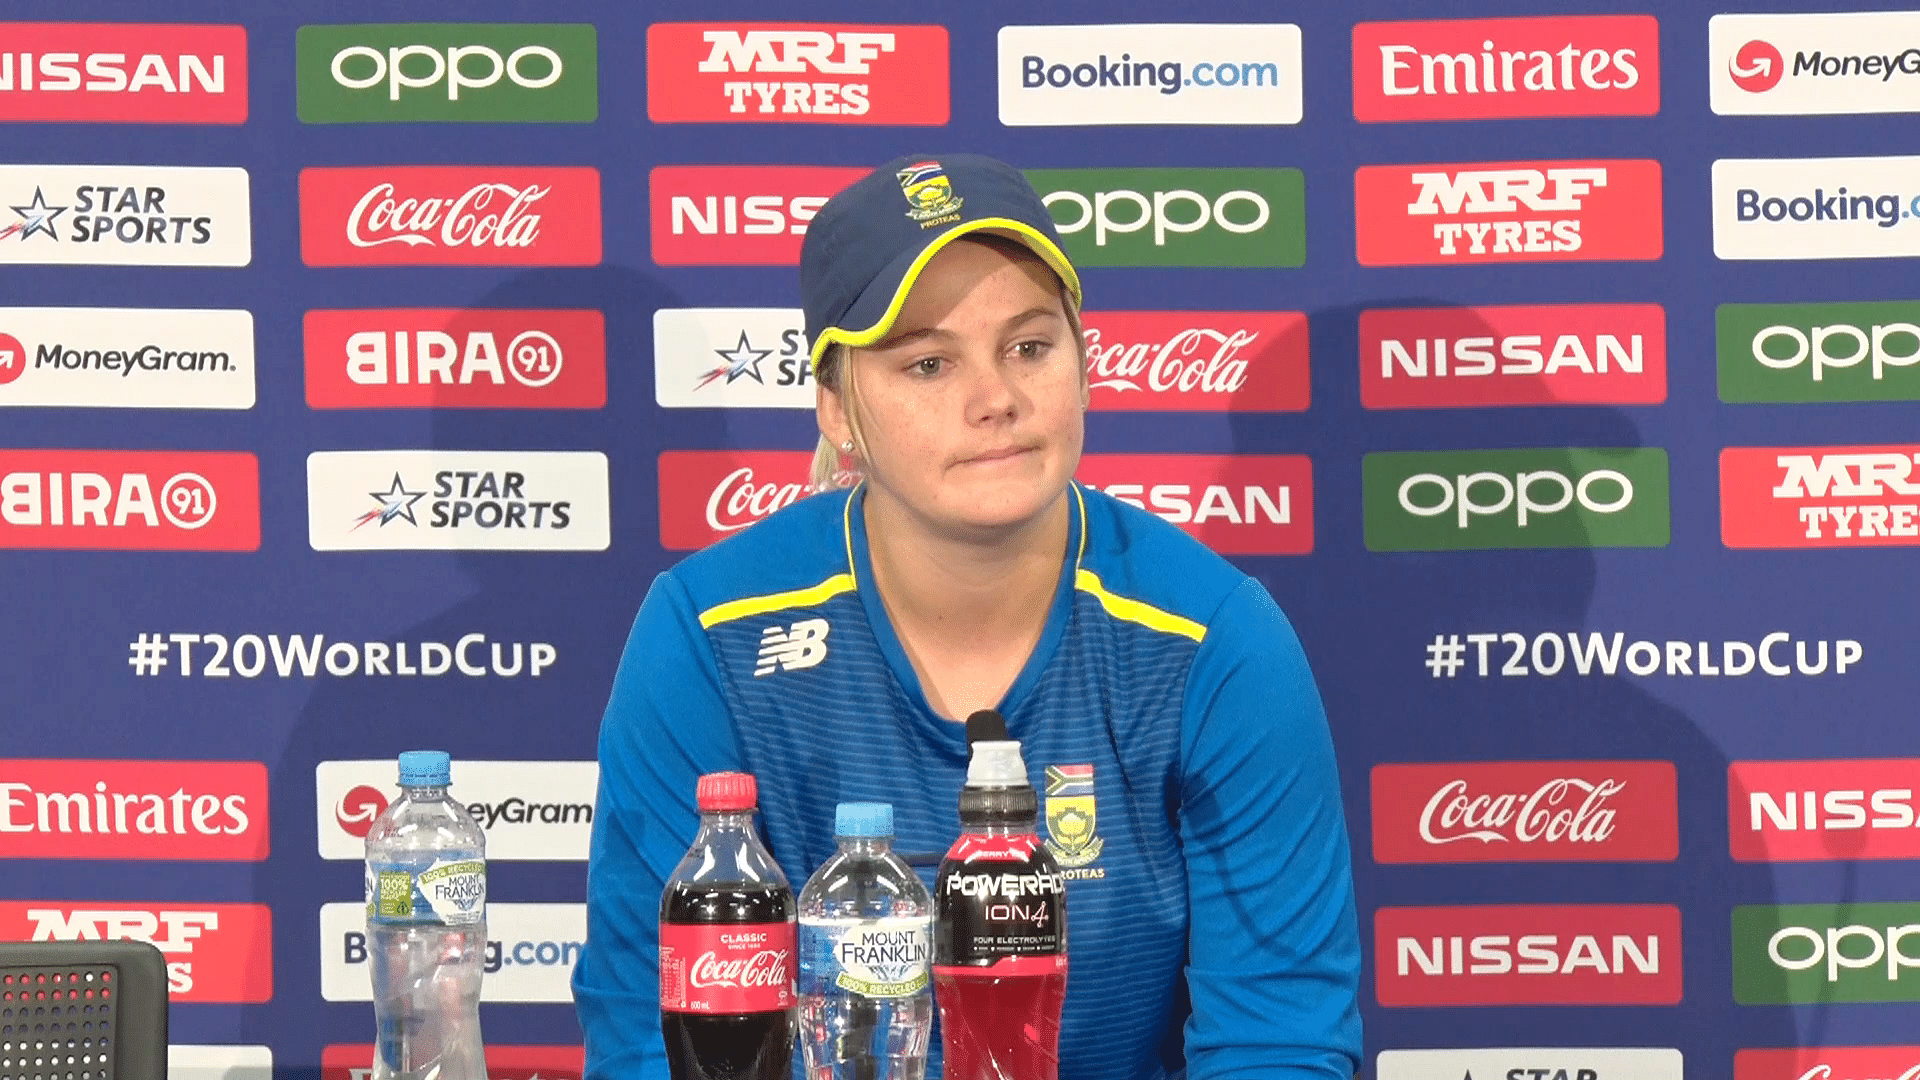 South Africa captain said that she would rather lose a semi-final than “get a free pass” to the World Cup final.